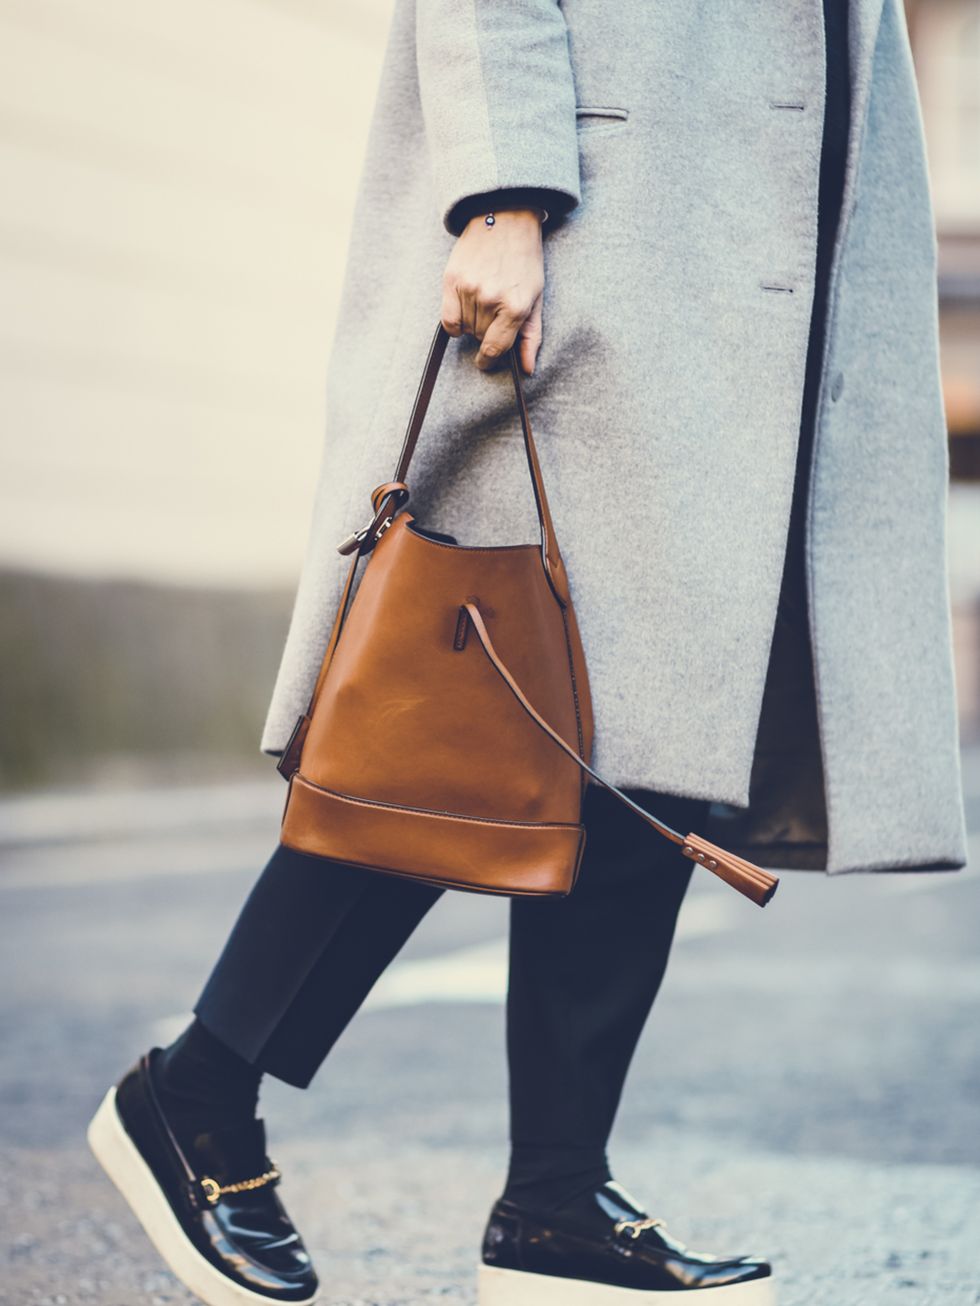 <p>Rebecca Lowthorpe - ELLE Collections Editor / ELLE Assistant Editor</p>

<p>Richard Nicoll coat, Celine trousers and shoes, Louis Vuitton bag.</p>